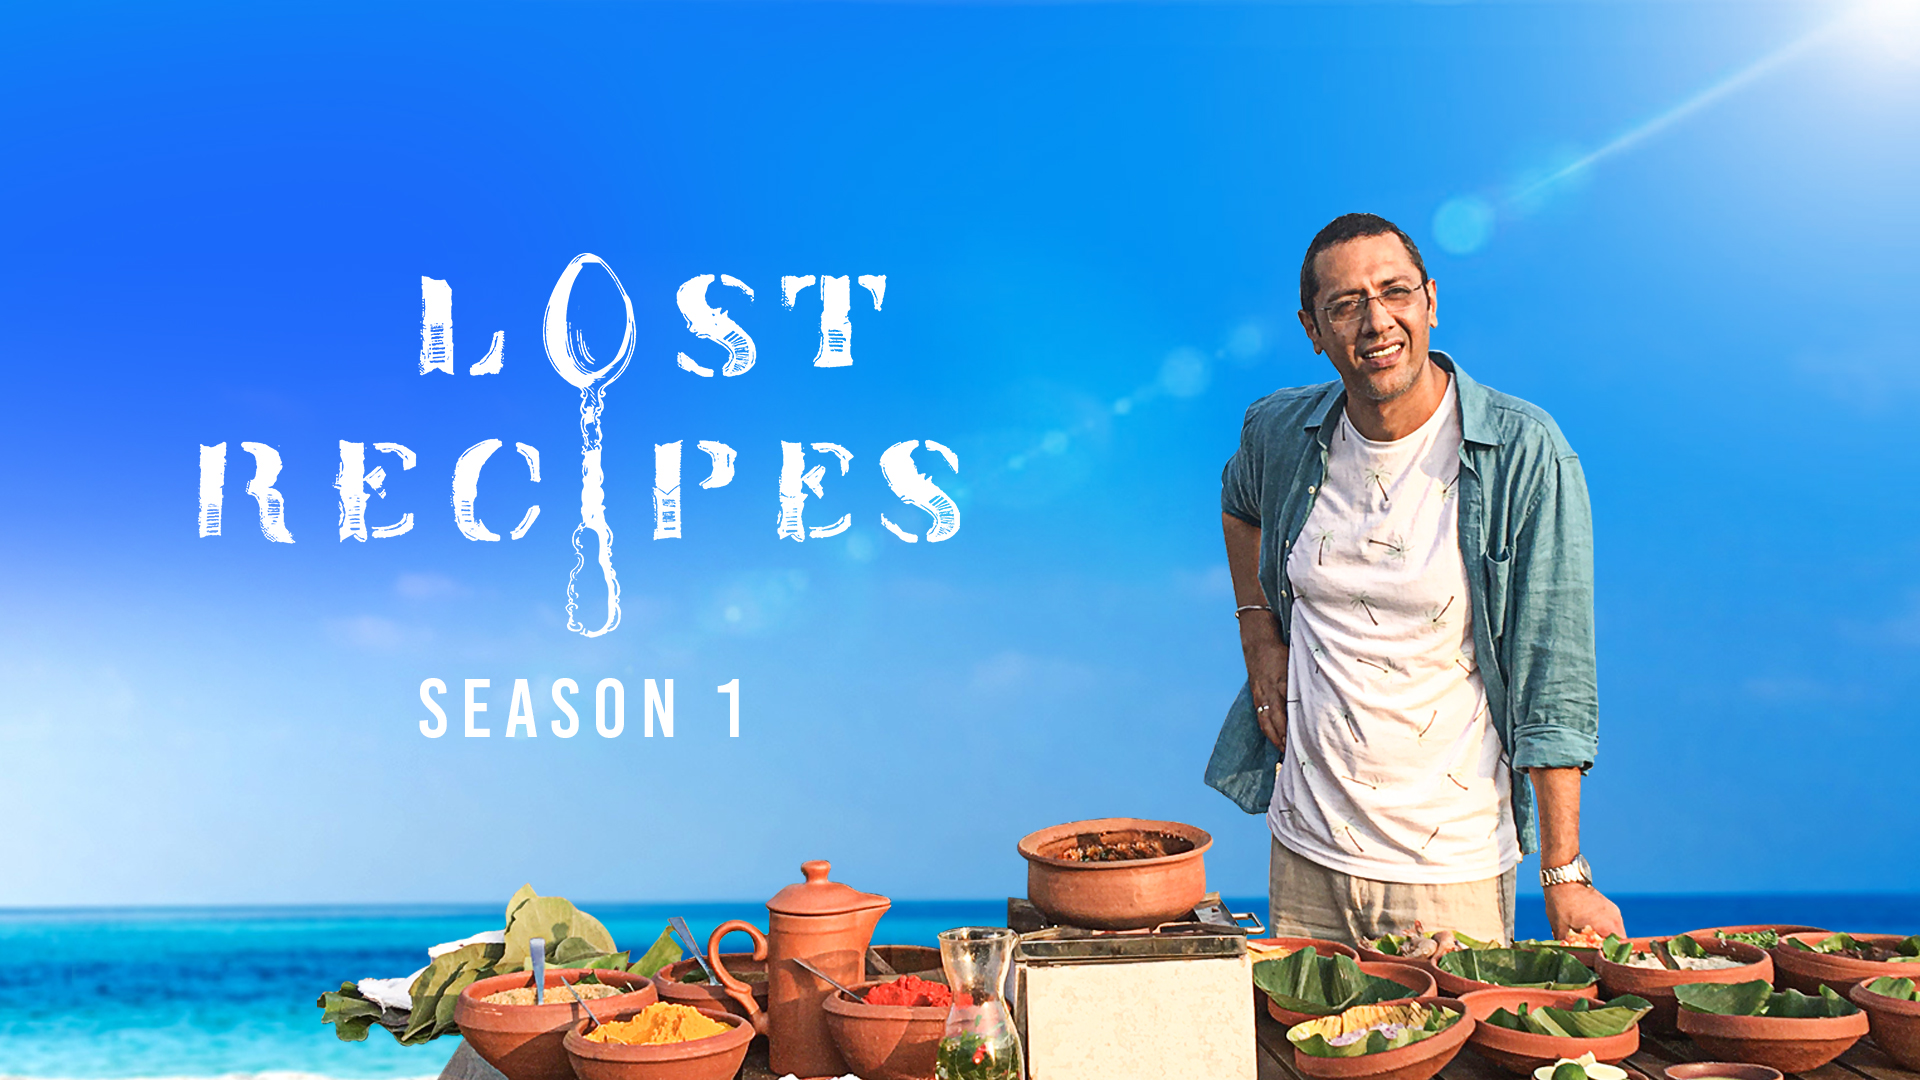 Is “Recipe Lost and Found Season 1” on Discovery+